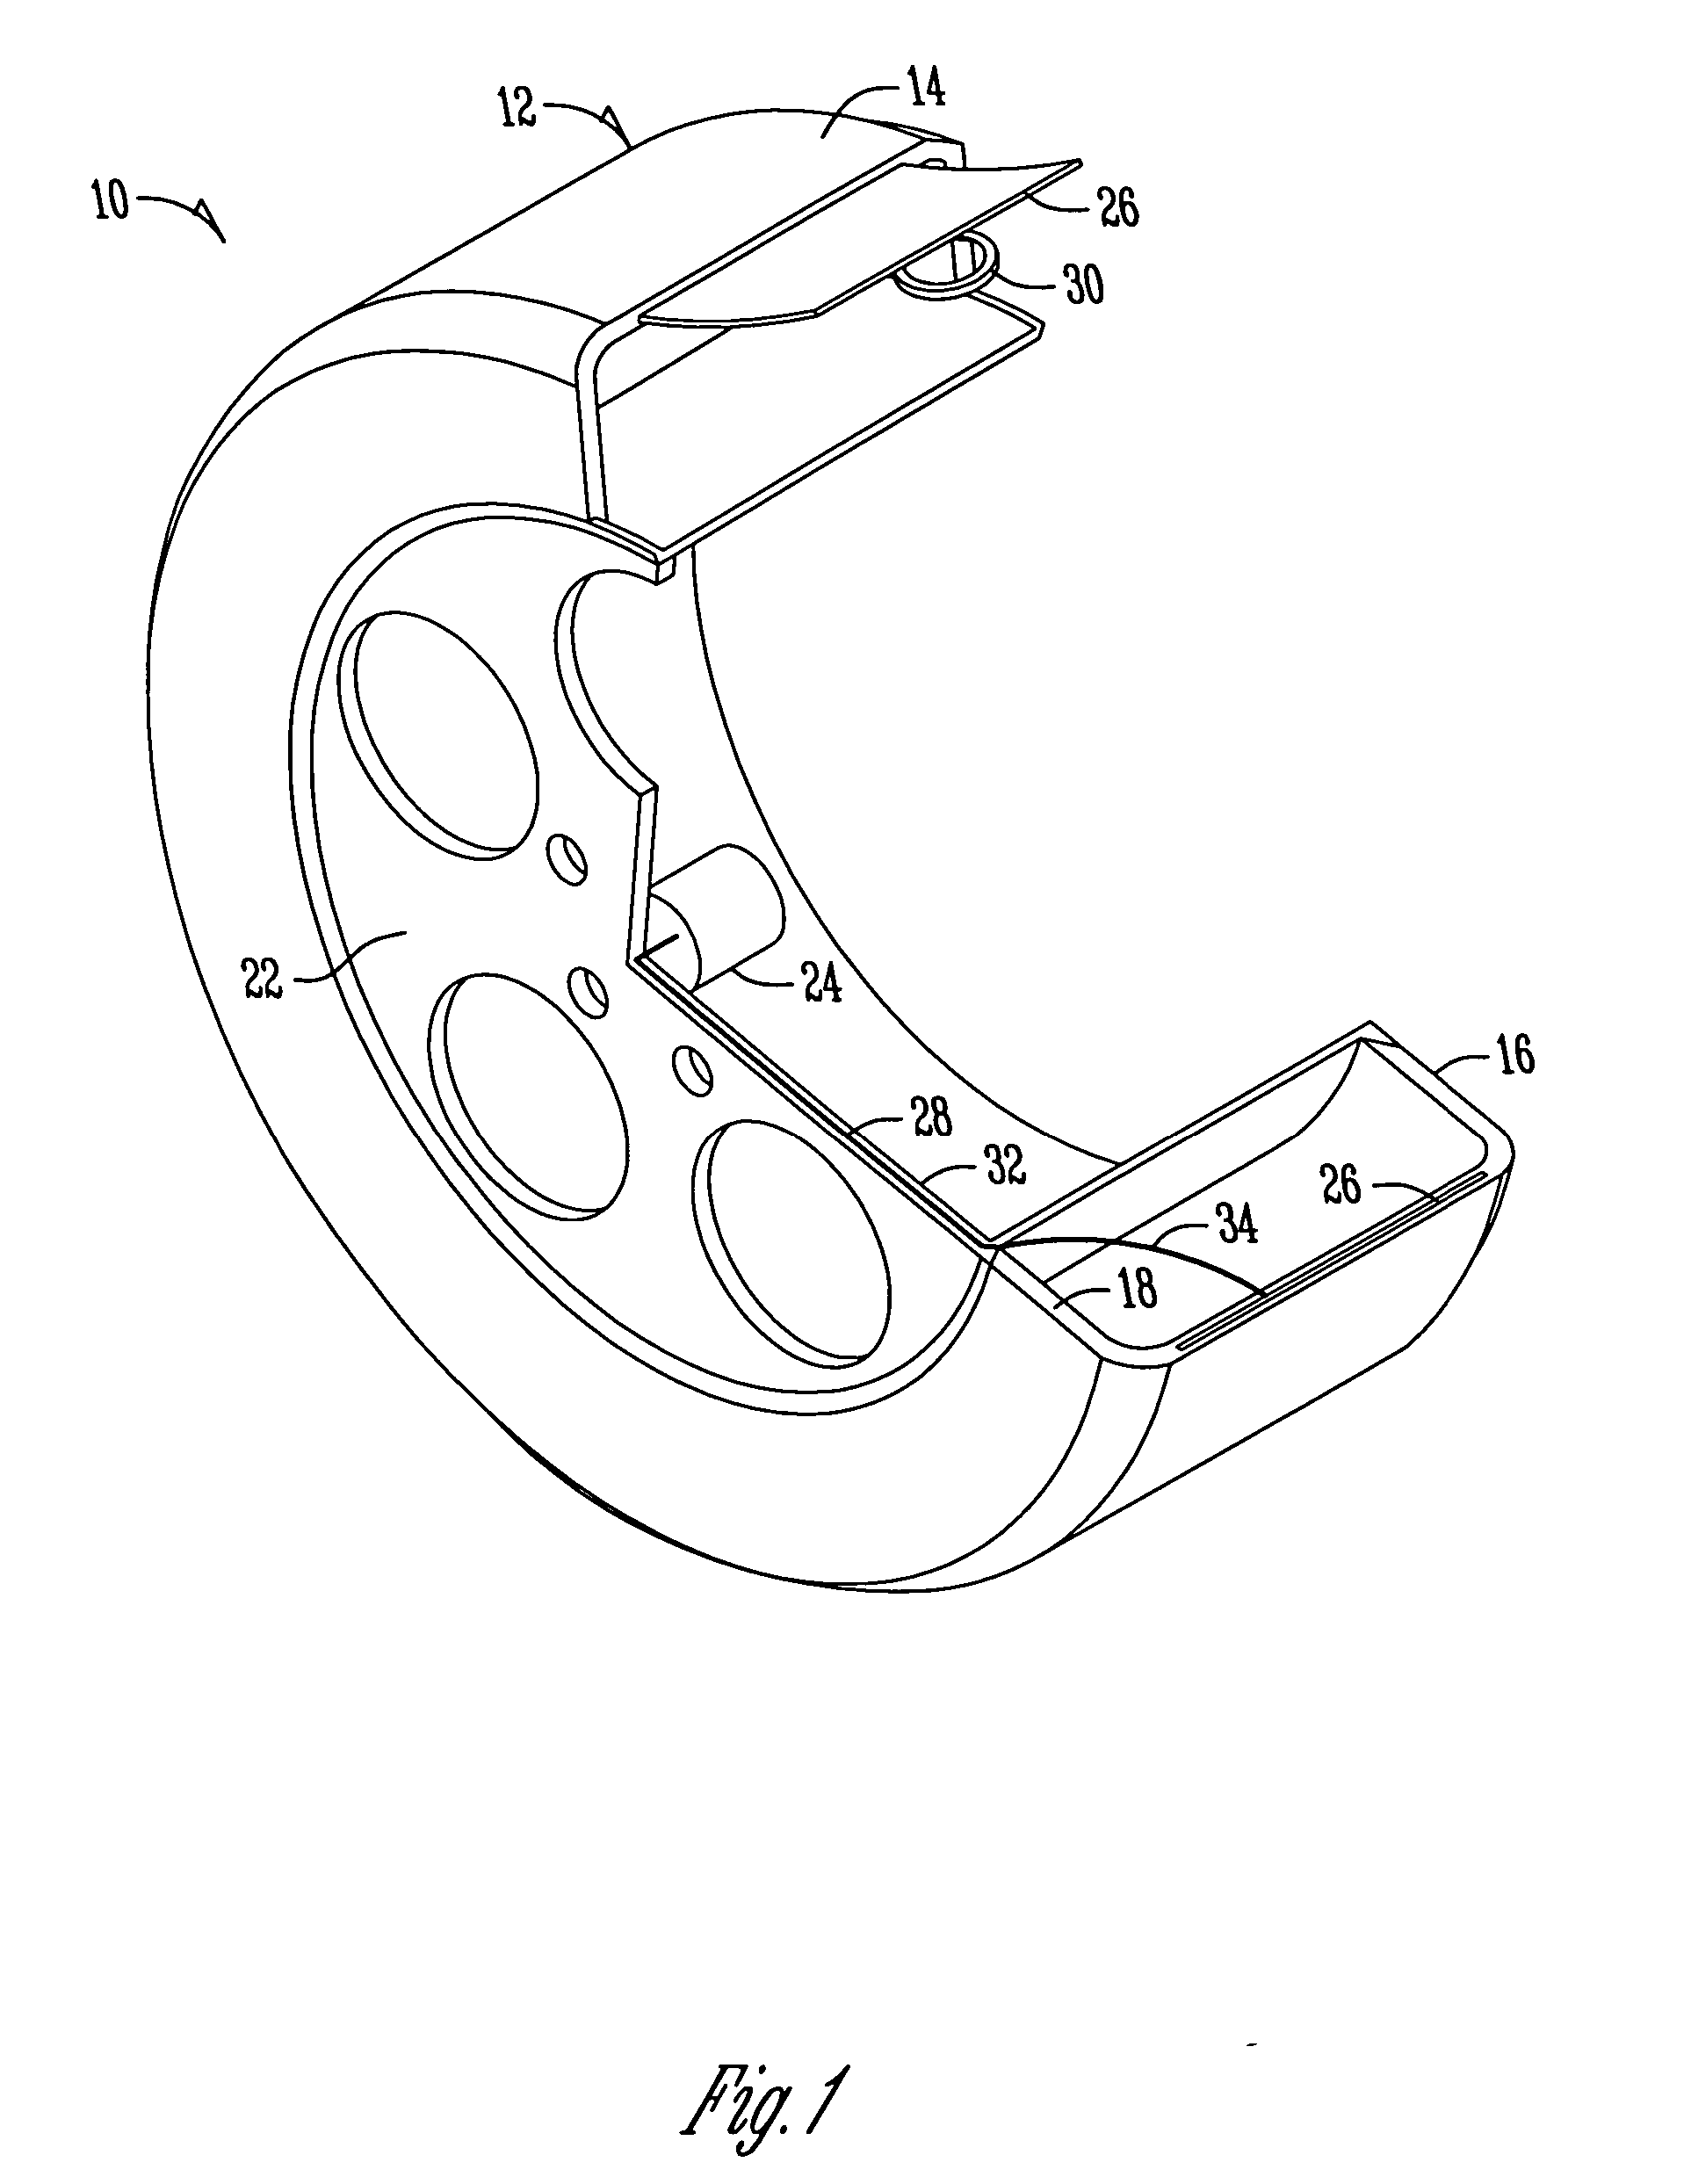 Method and apparatus for conversion of movement to electrical energy